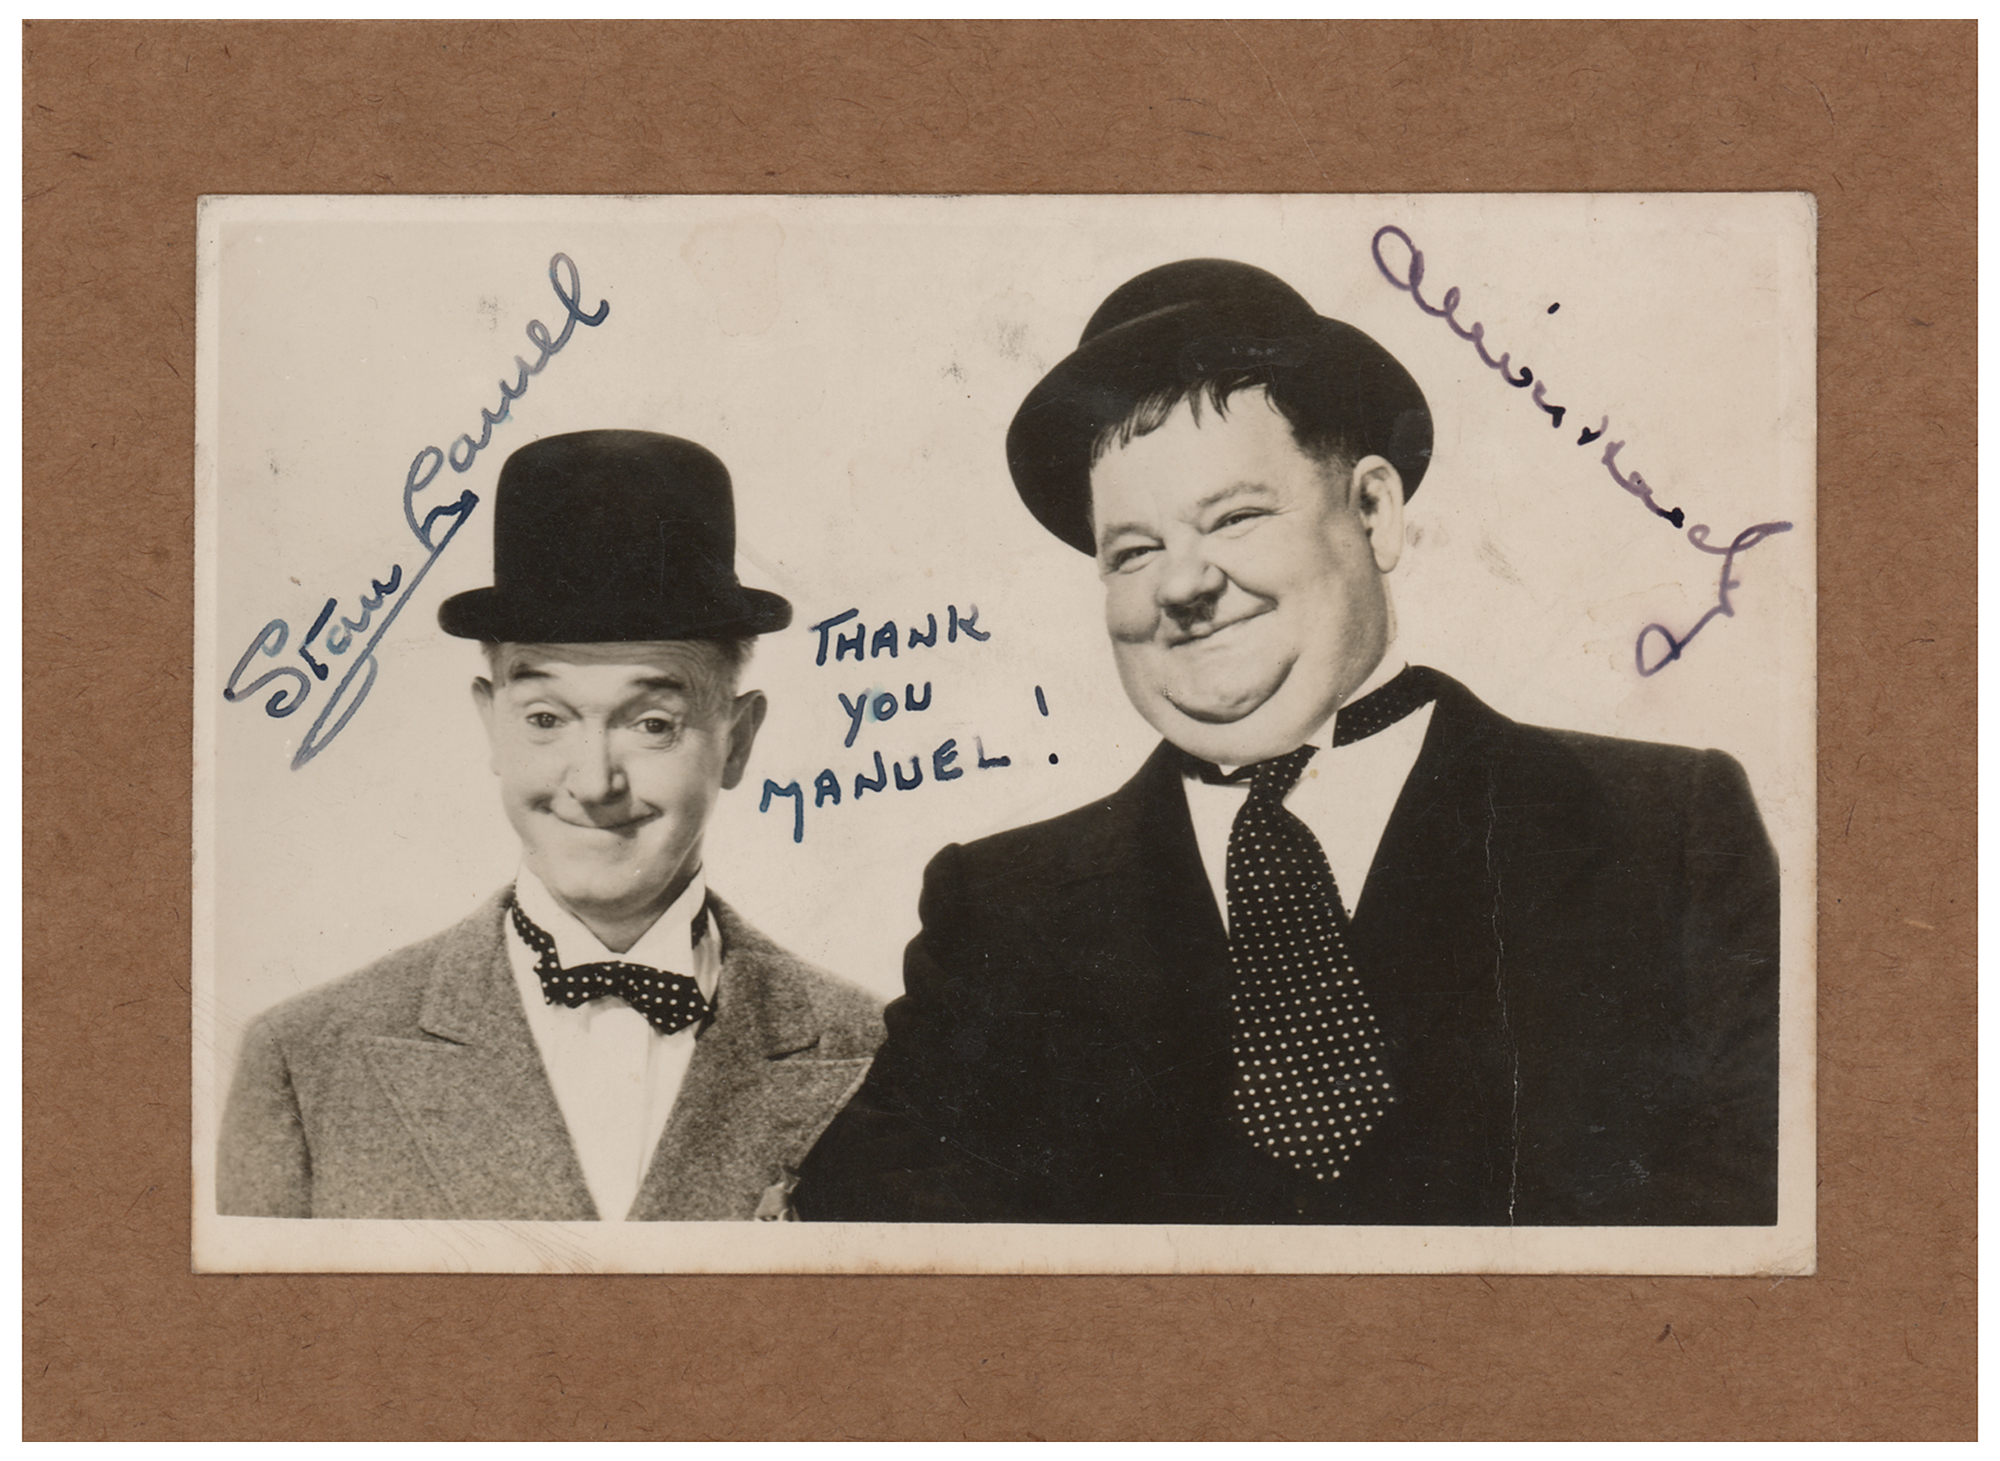 Stan Laurel And Oliver Hardy Signed Photograph Sold For 596 Rr